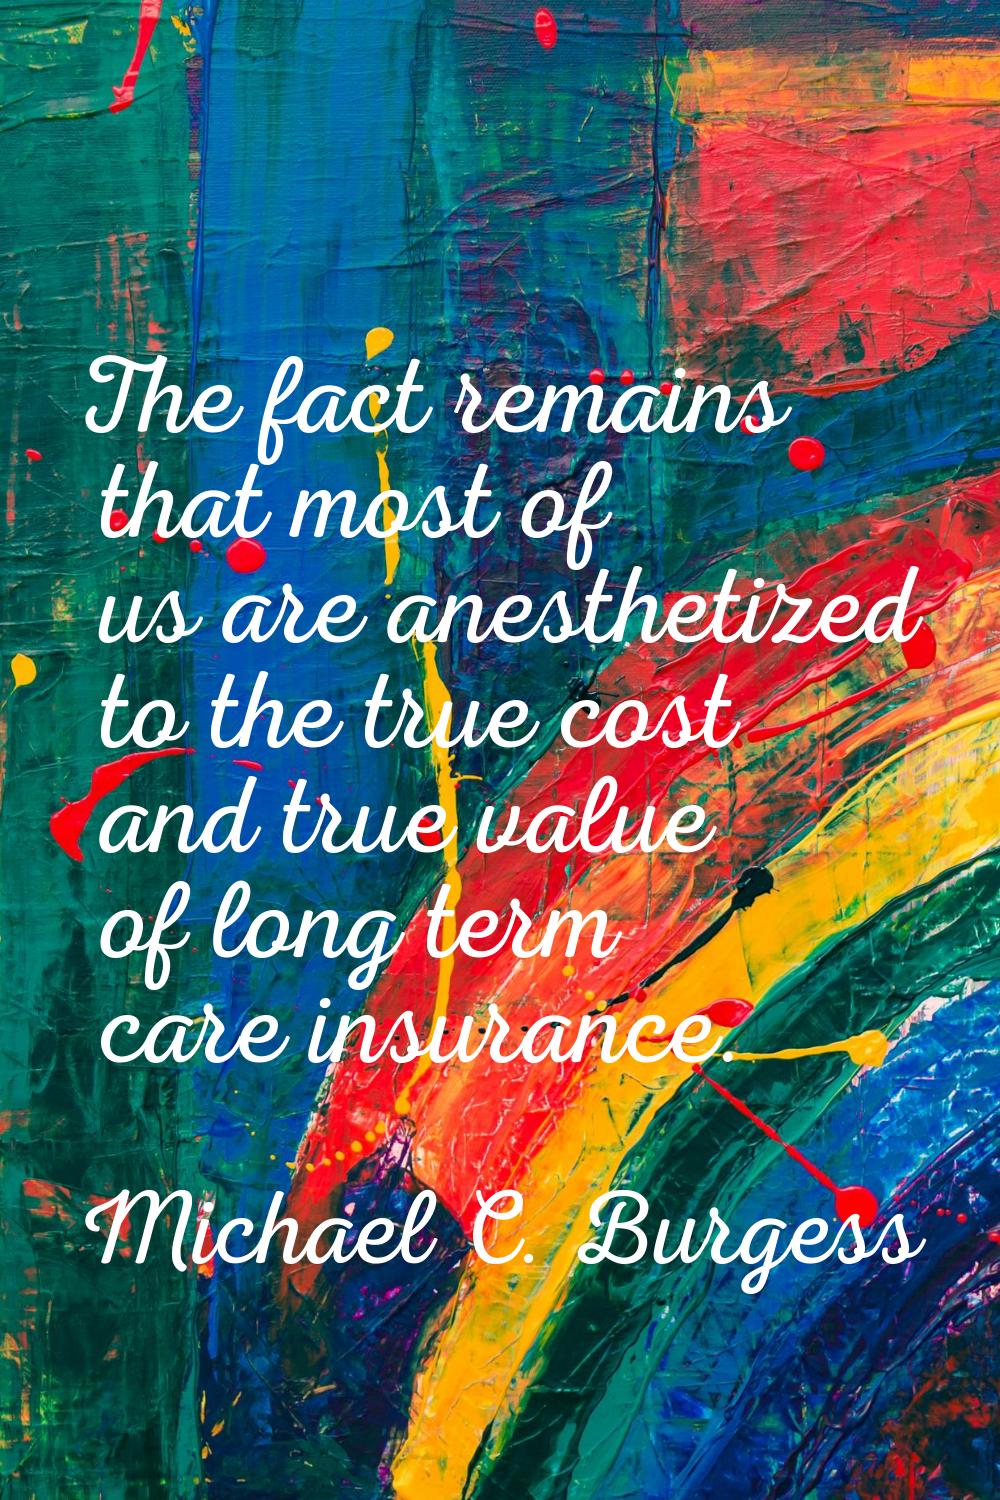 The fact remains that most of us are anesthetized to the true cost and true value of long term care